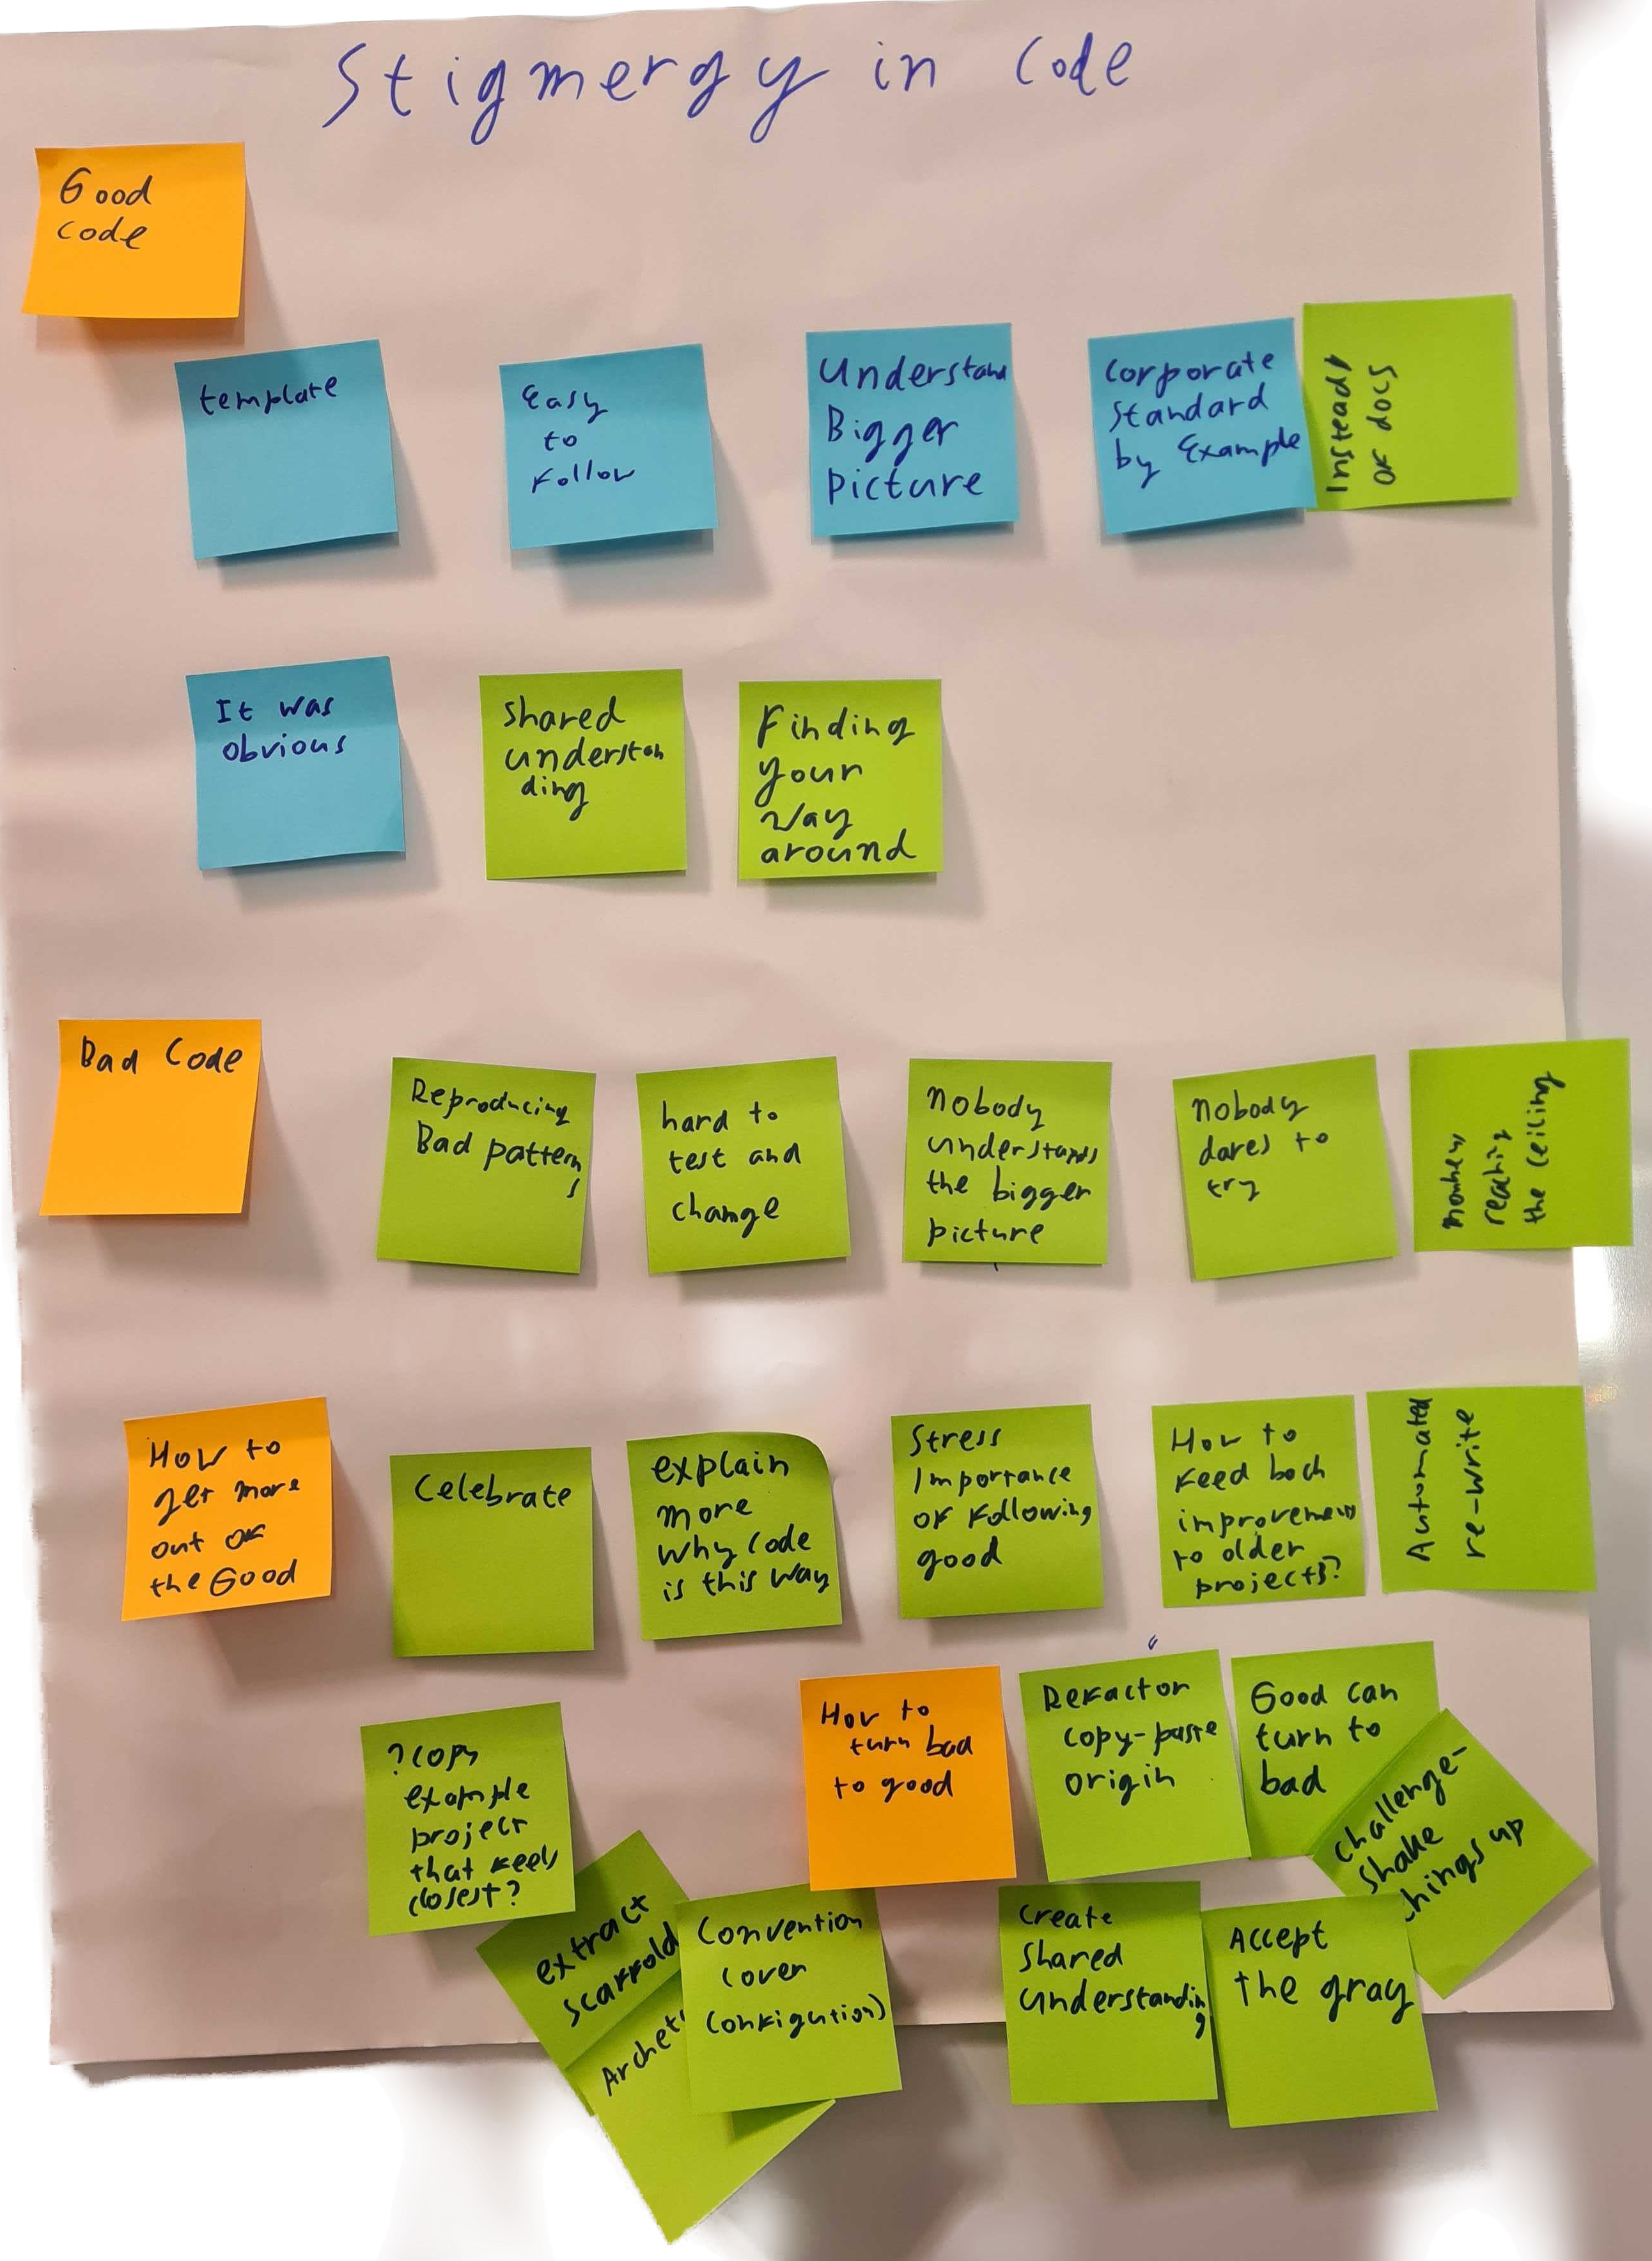 Poster with post-it notes, explained below.